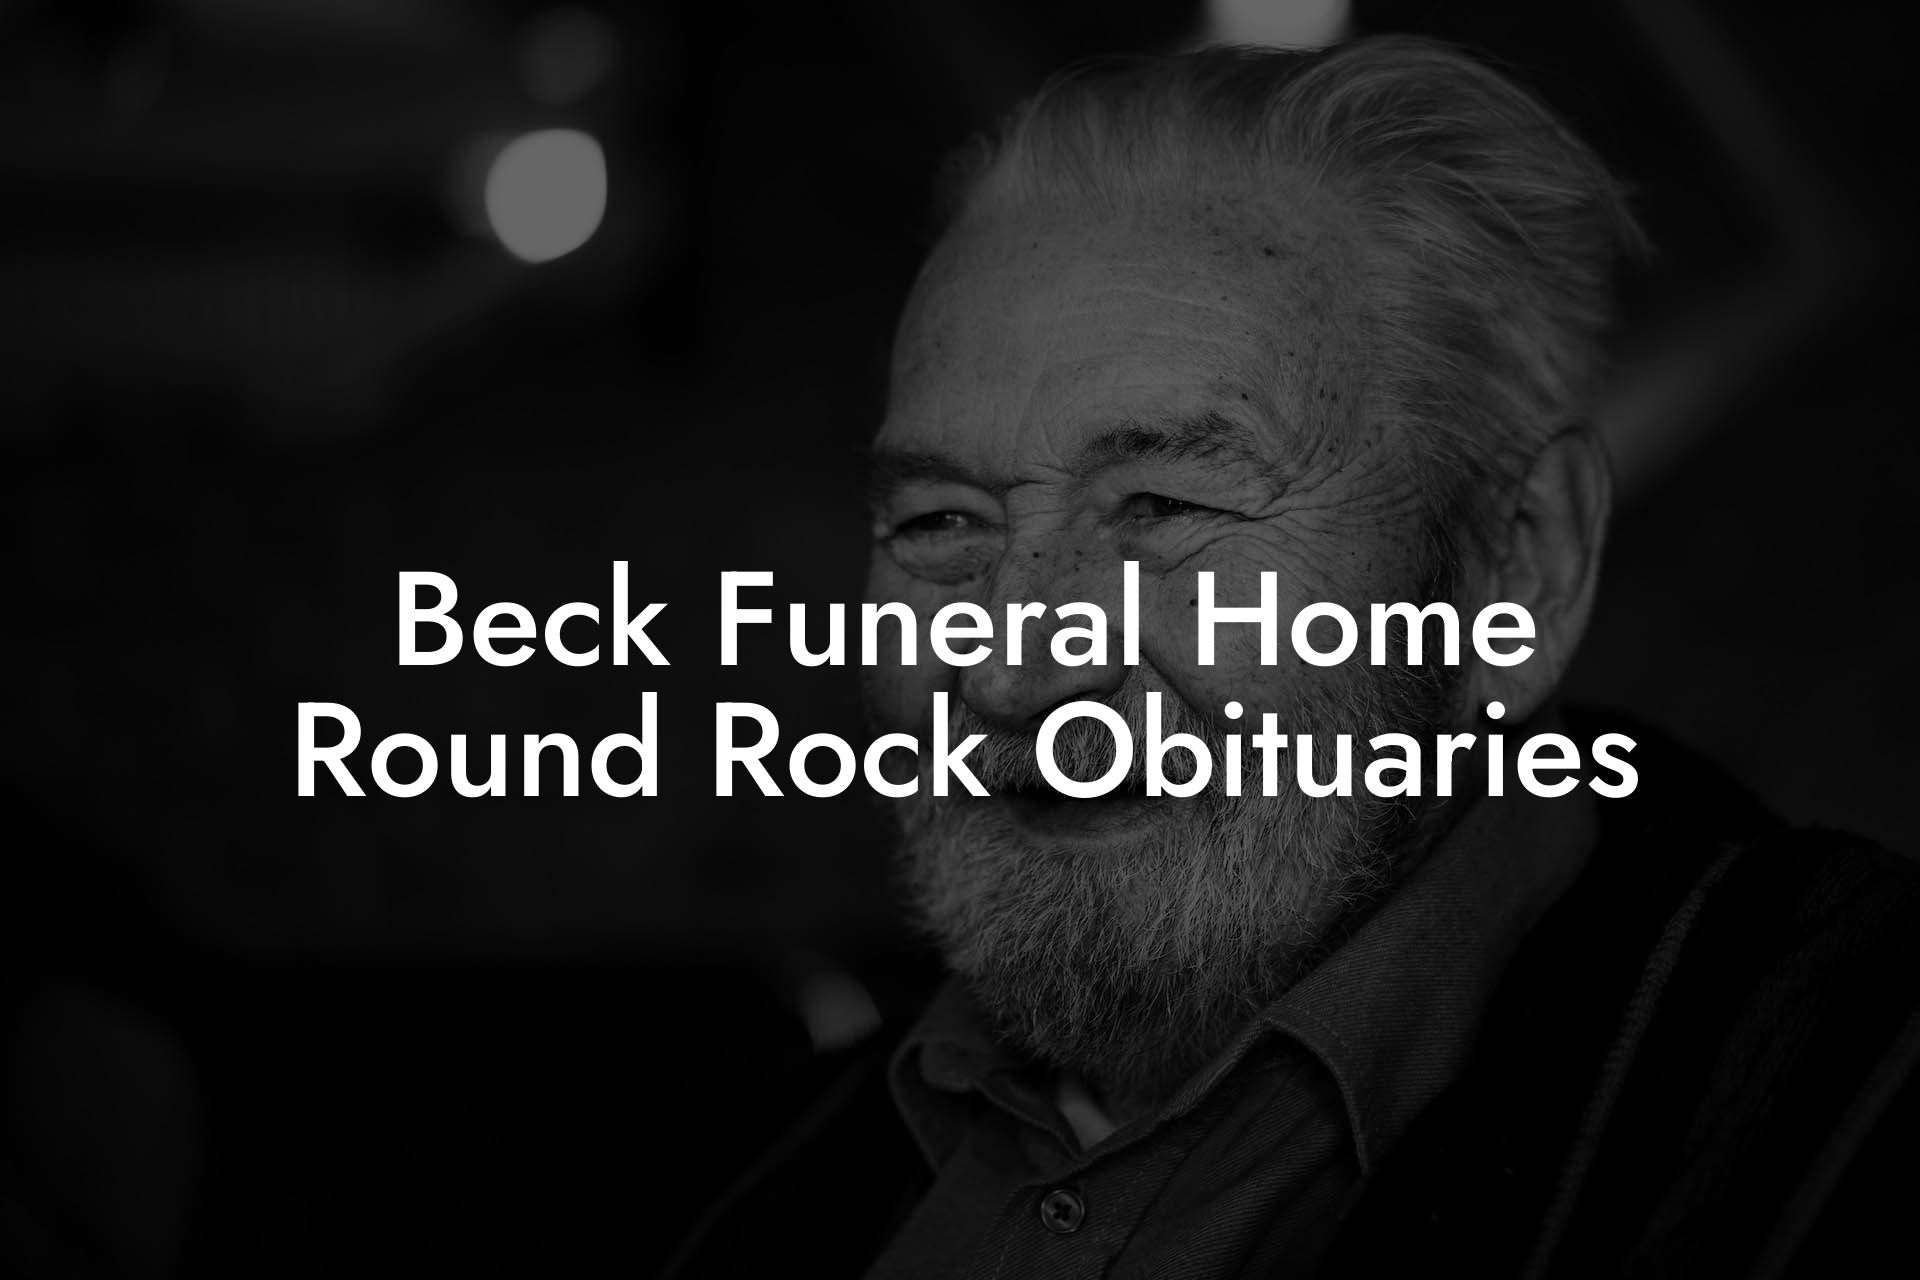 Beck Funeral Home Round Rock Obituaries